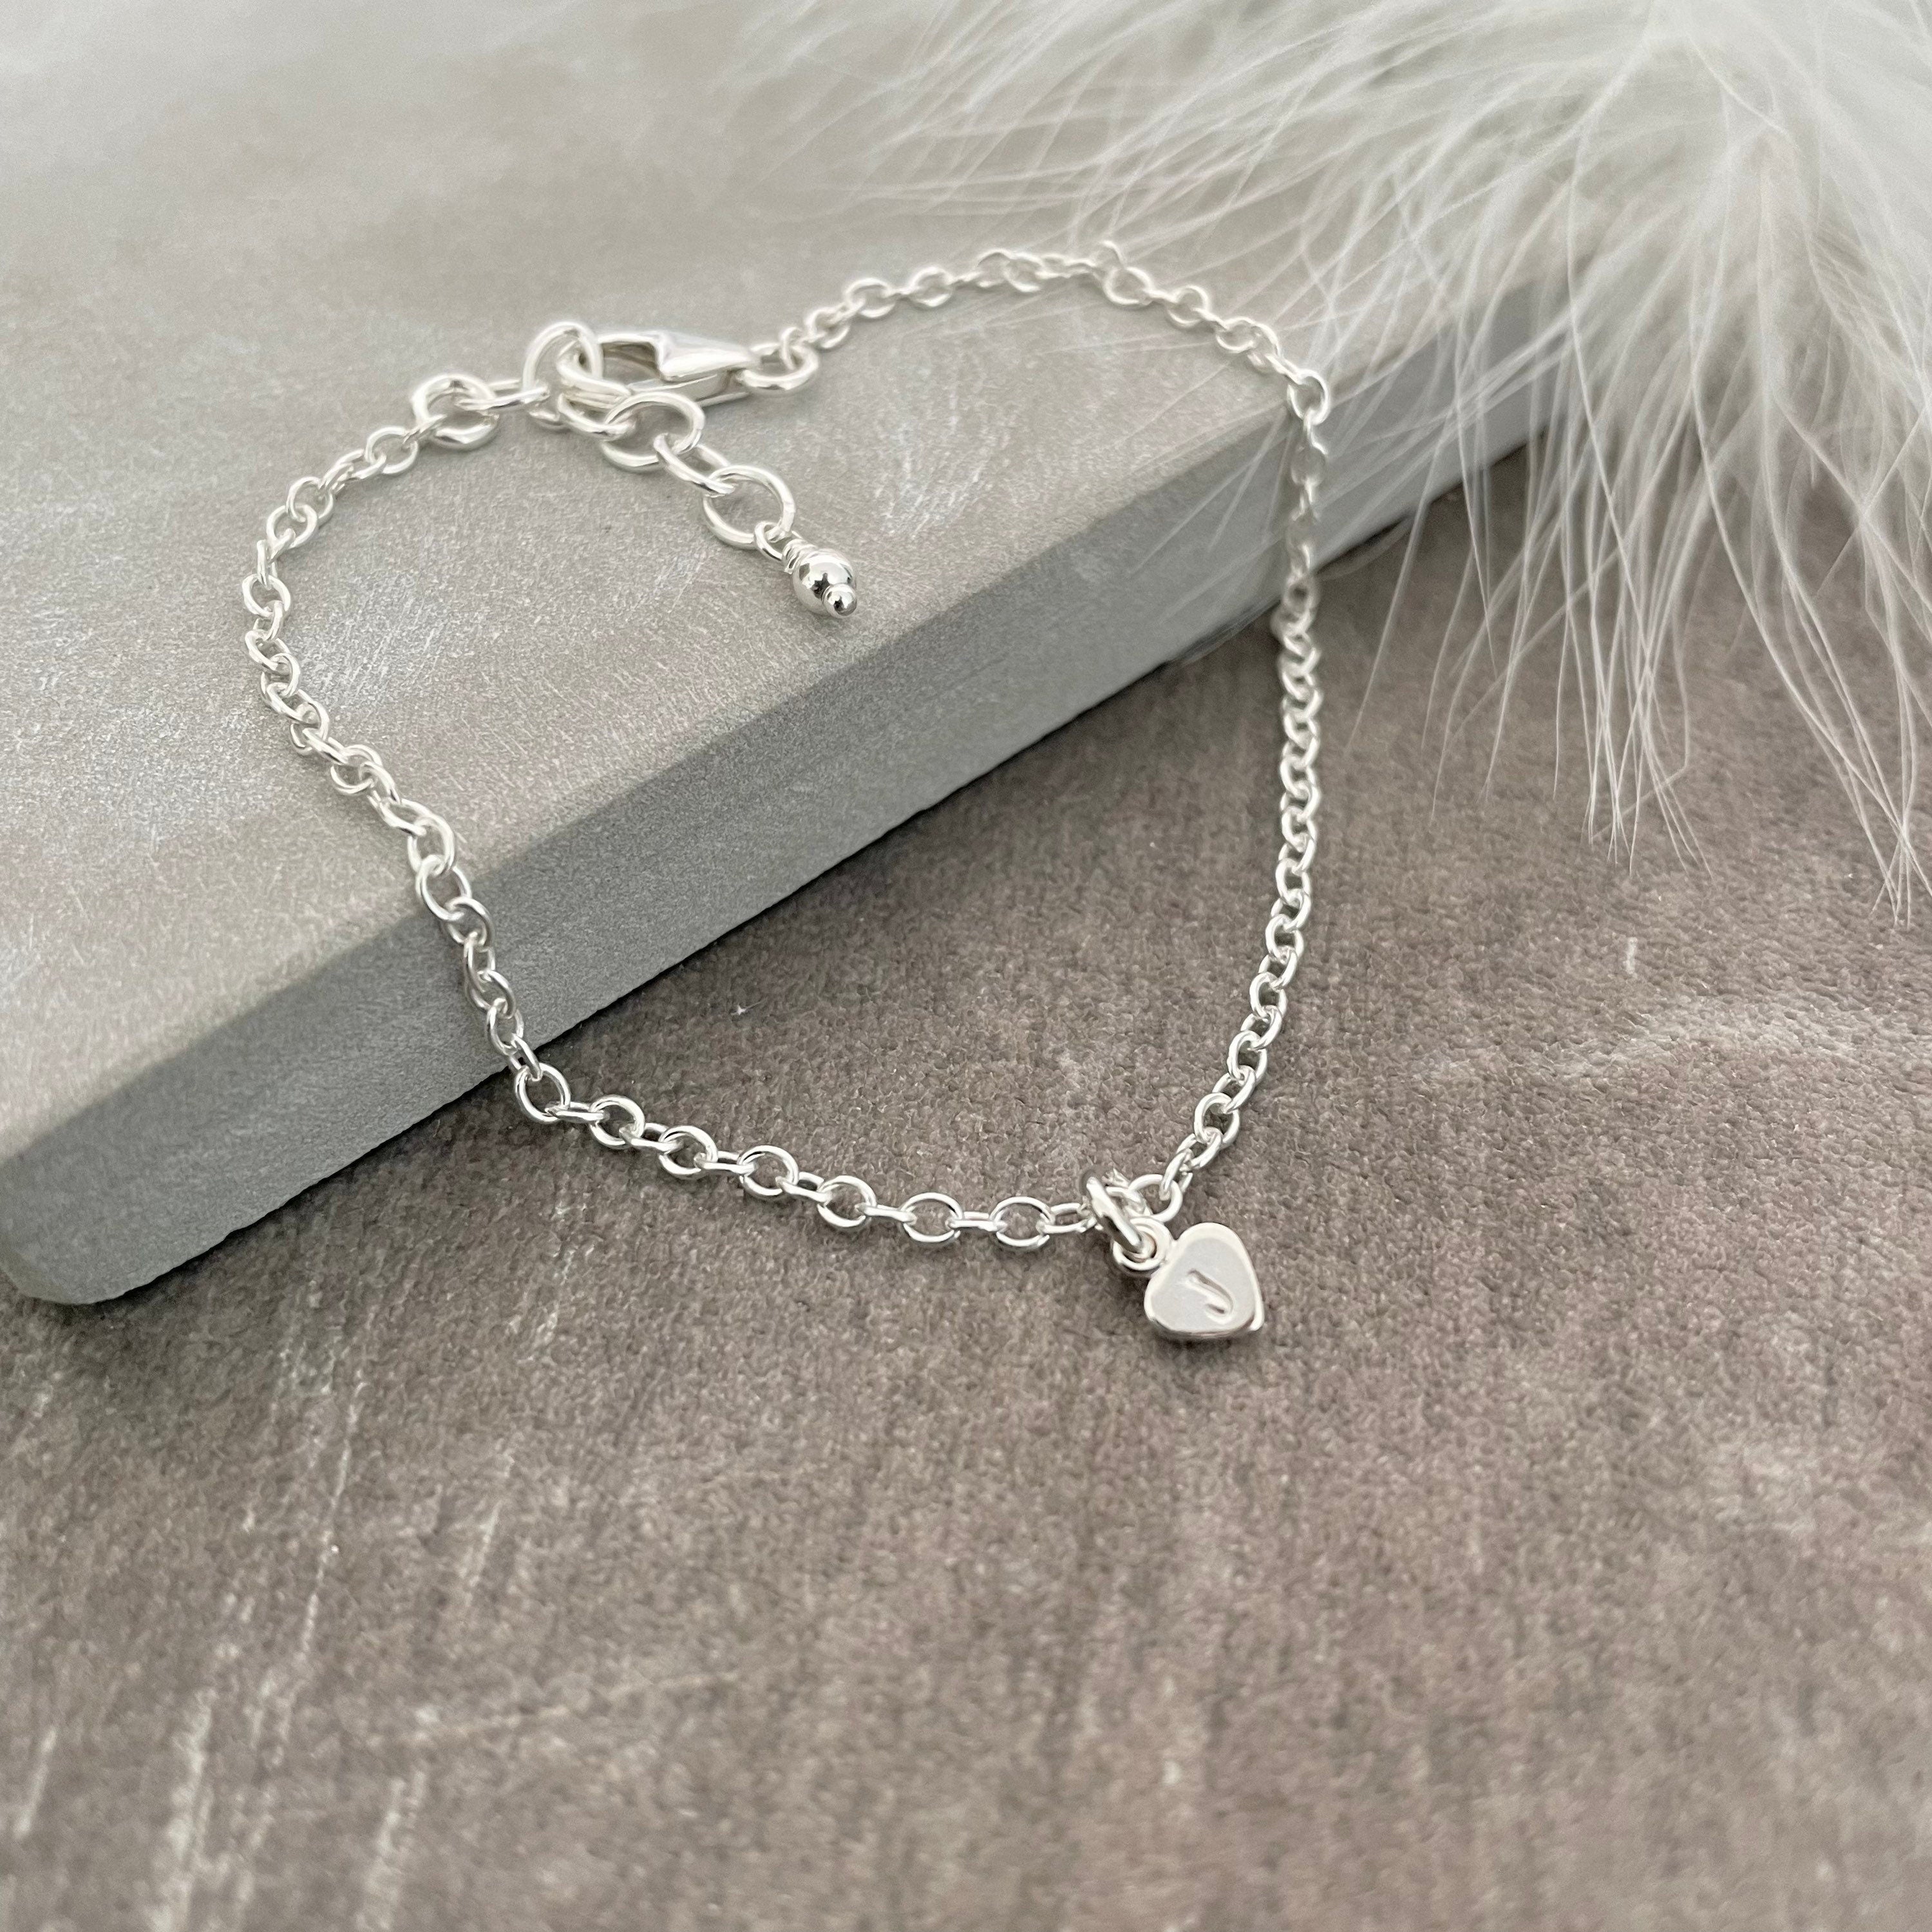 Silver Cuddles Fingerprint Jewellery & Personalised Gifts - ❤️IMPRINT  JEWELLERY❤️ A special Mam's fingerprint imprinted into pure silver 😍  #fingerprintjewellery #imprintjewellery #silvercuddles #memorialjewellery |  Facebook